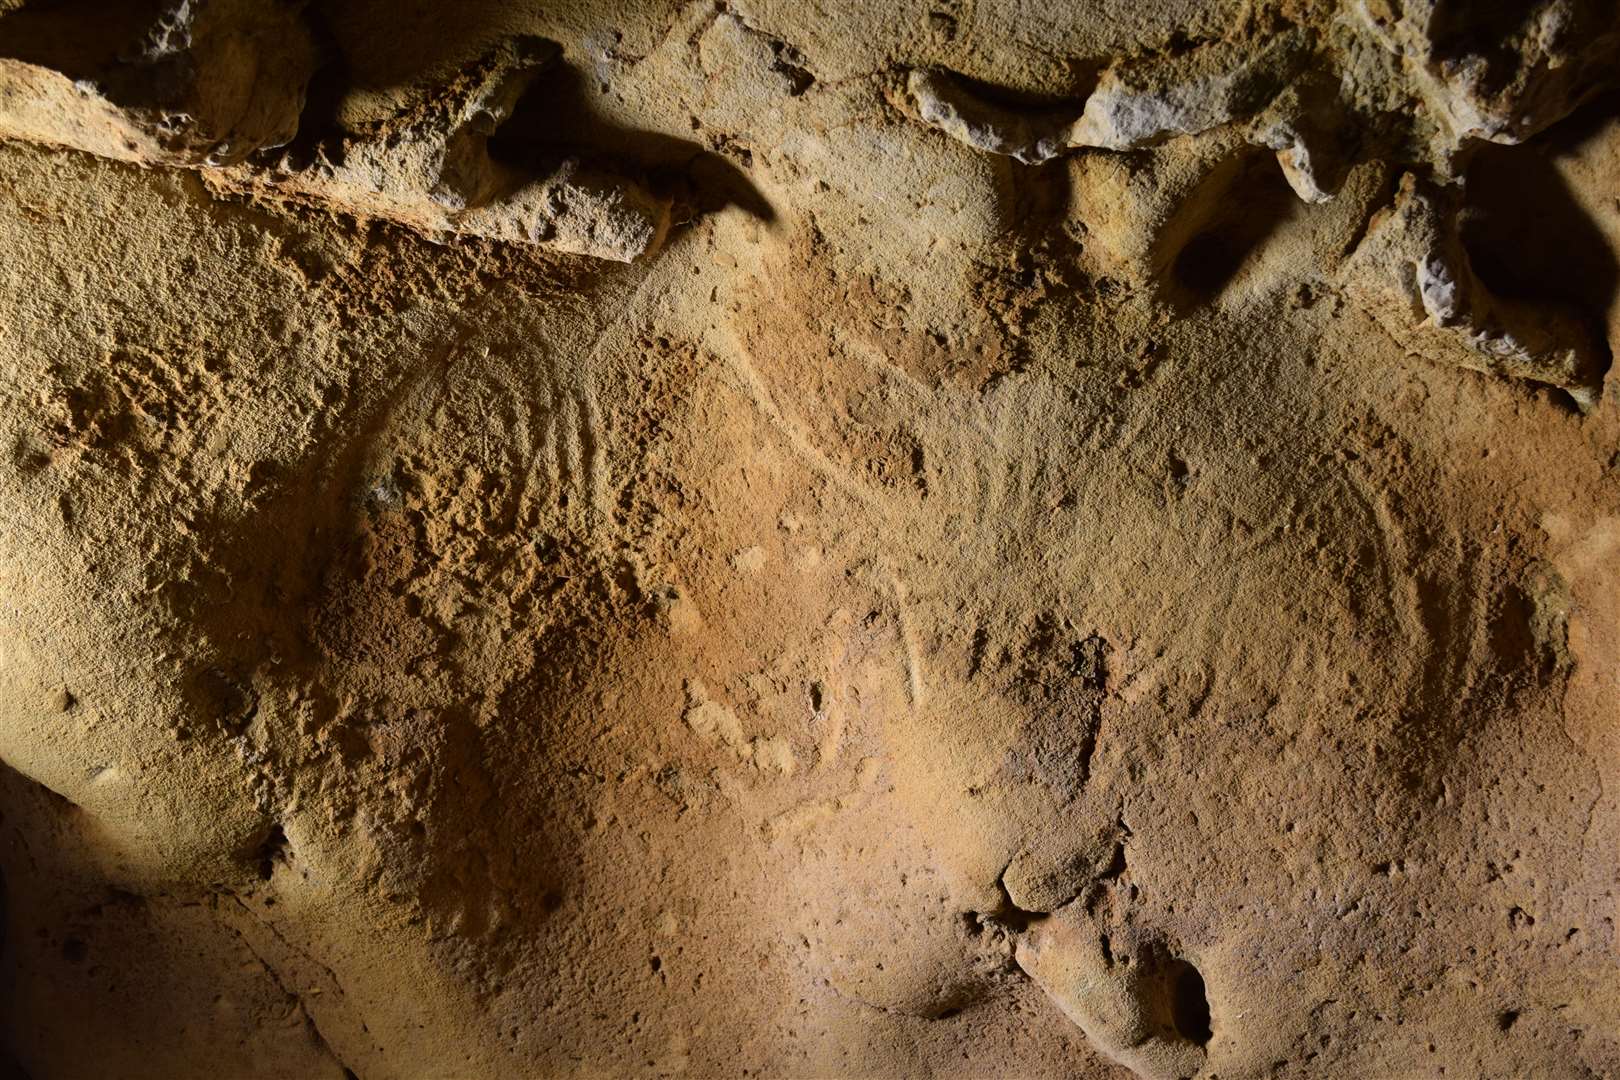 Engravings discovered in La Roche-Cotard cave in Loire, France. On the left is a “circular panel”, and on the right, a “wavy panel” (Jean-Claude Marquet/University of Tours)